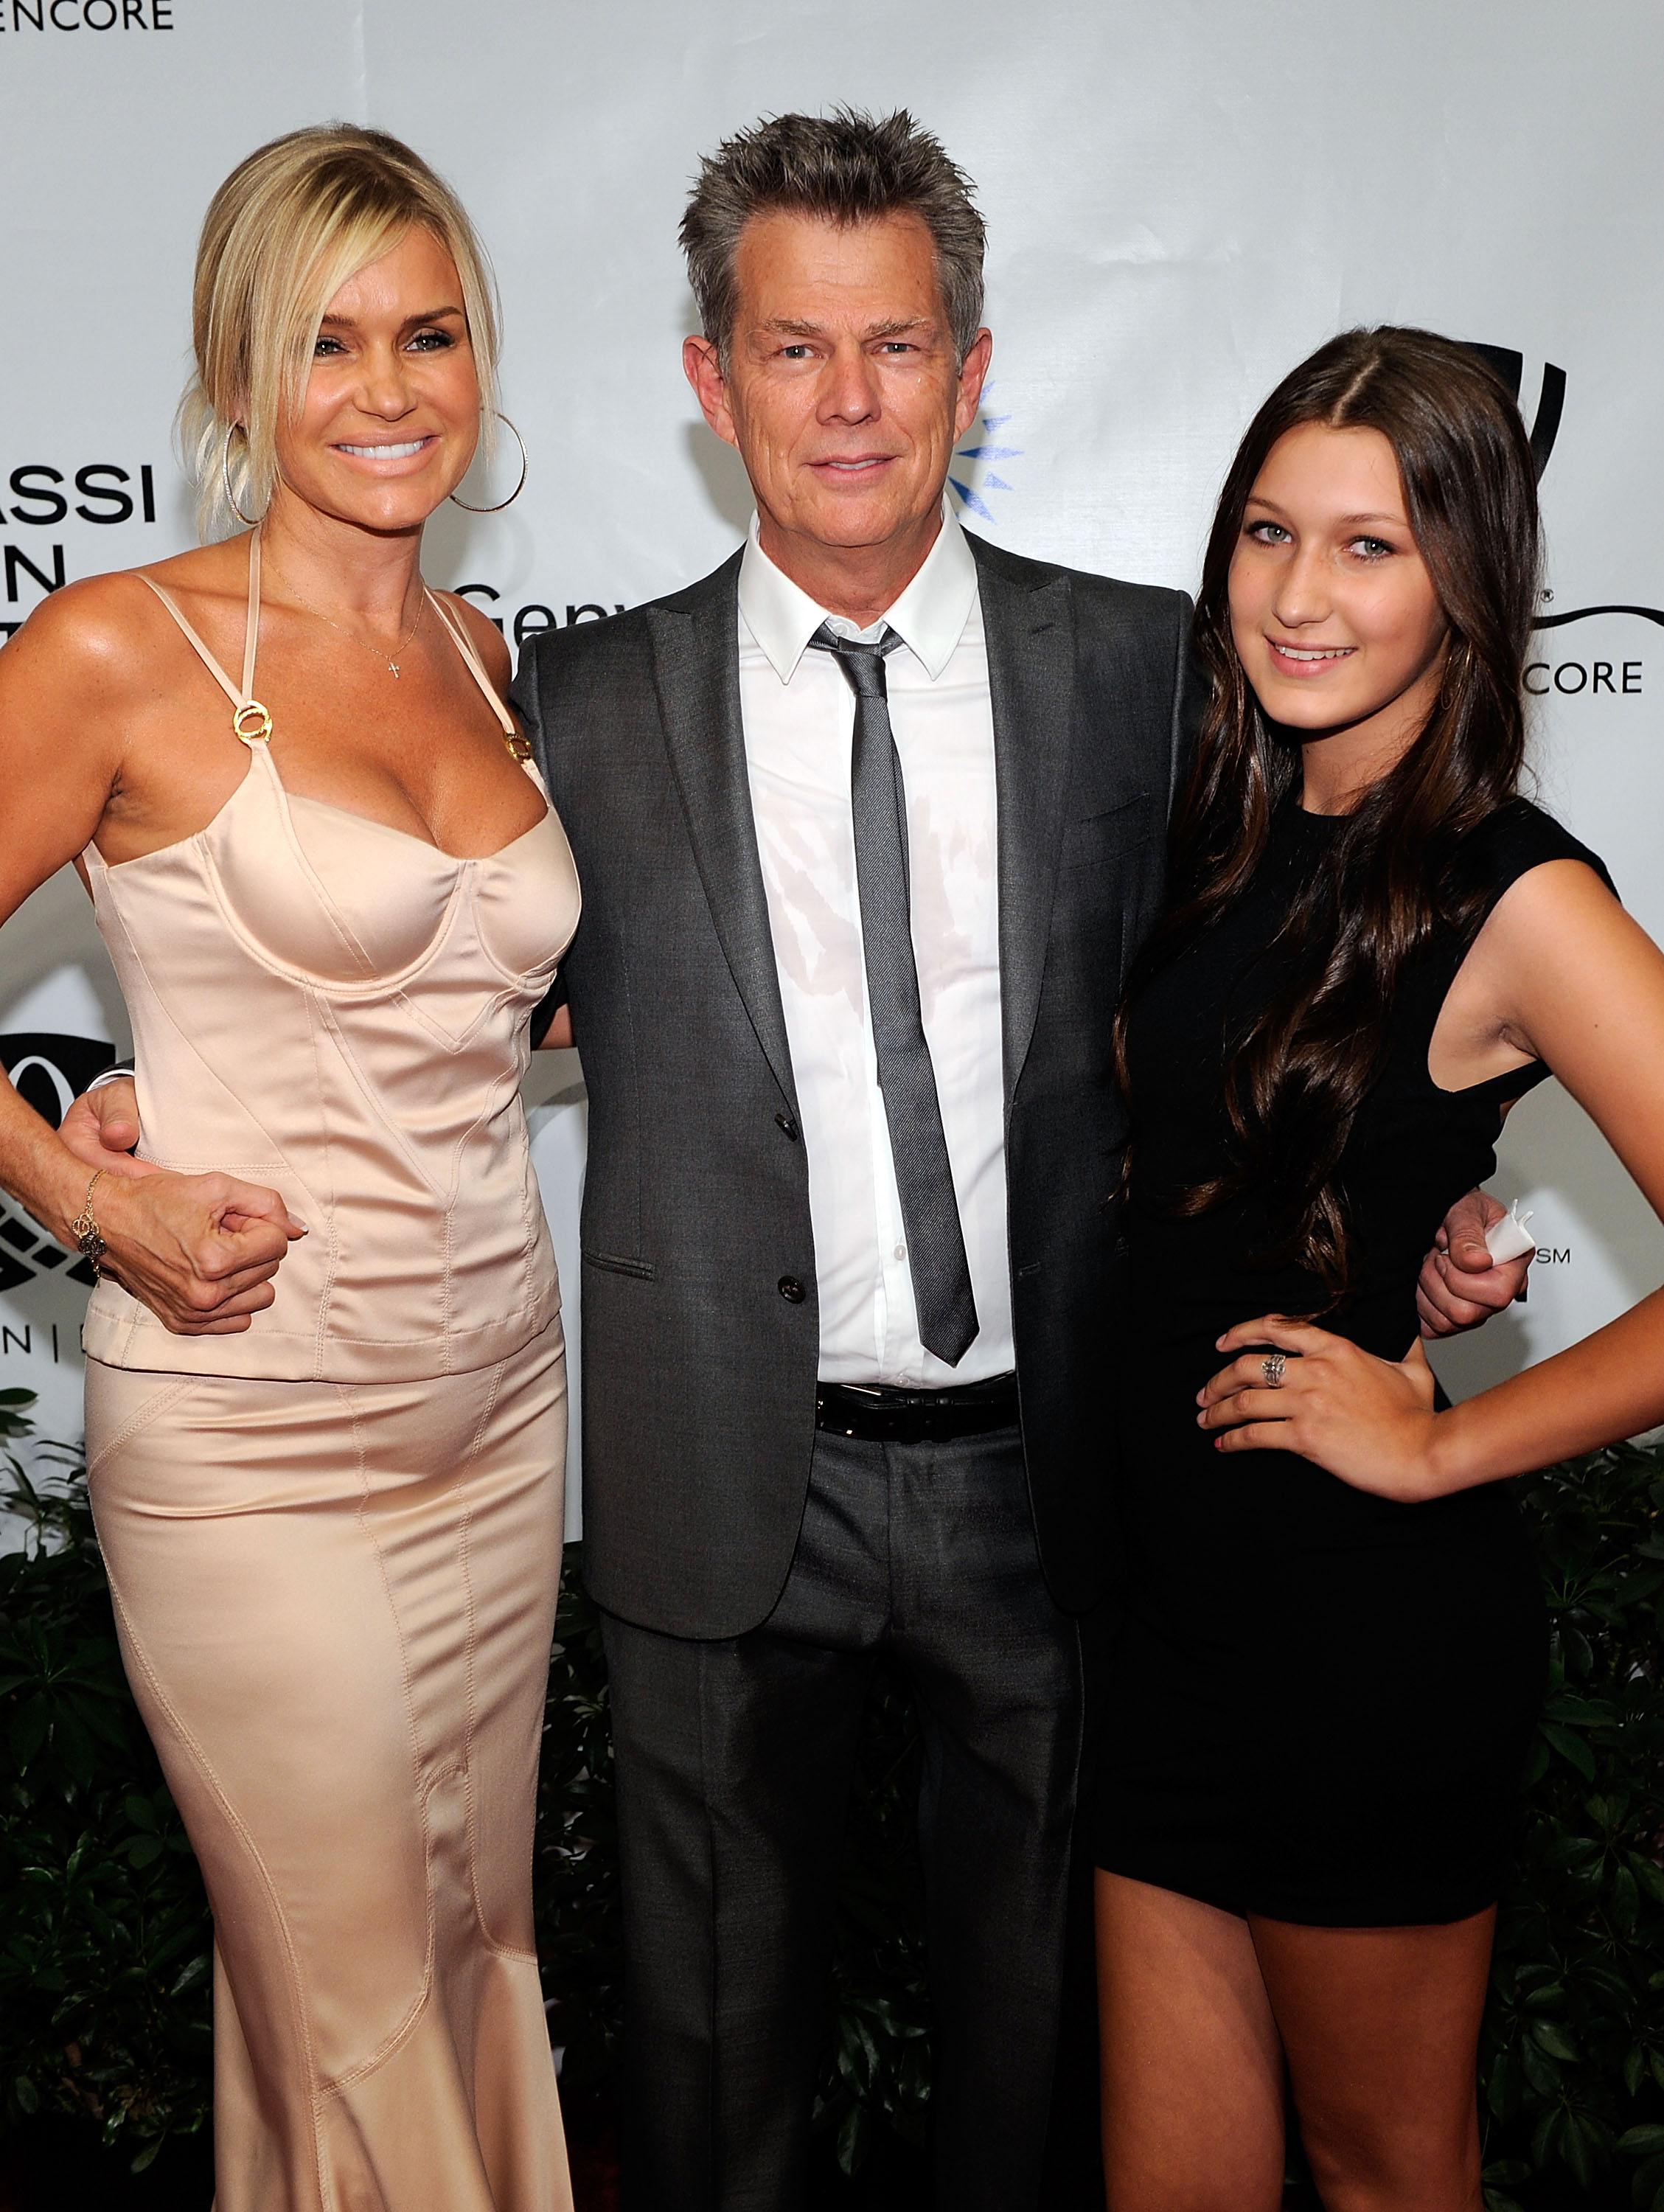 Yolanda Hadid, David Foster, and the girl at the Andre Agassi Foundation for Education's 15th Grand Slam for Children benefit concert in Las Vegas, Nevada on October 9, 2010 | Source: Getty Images